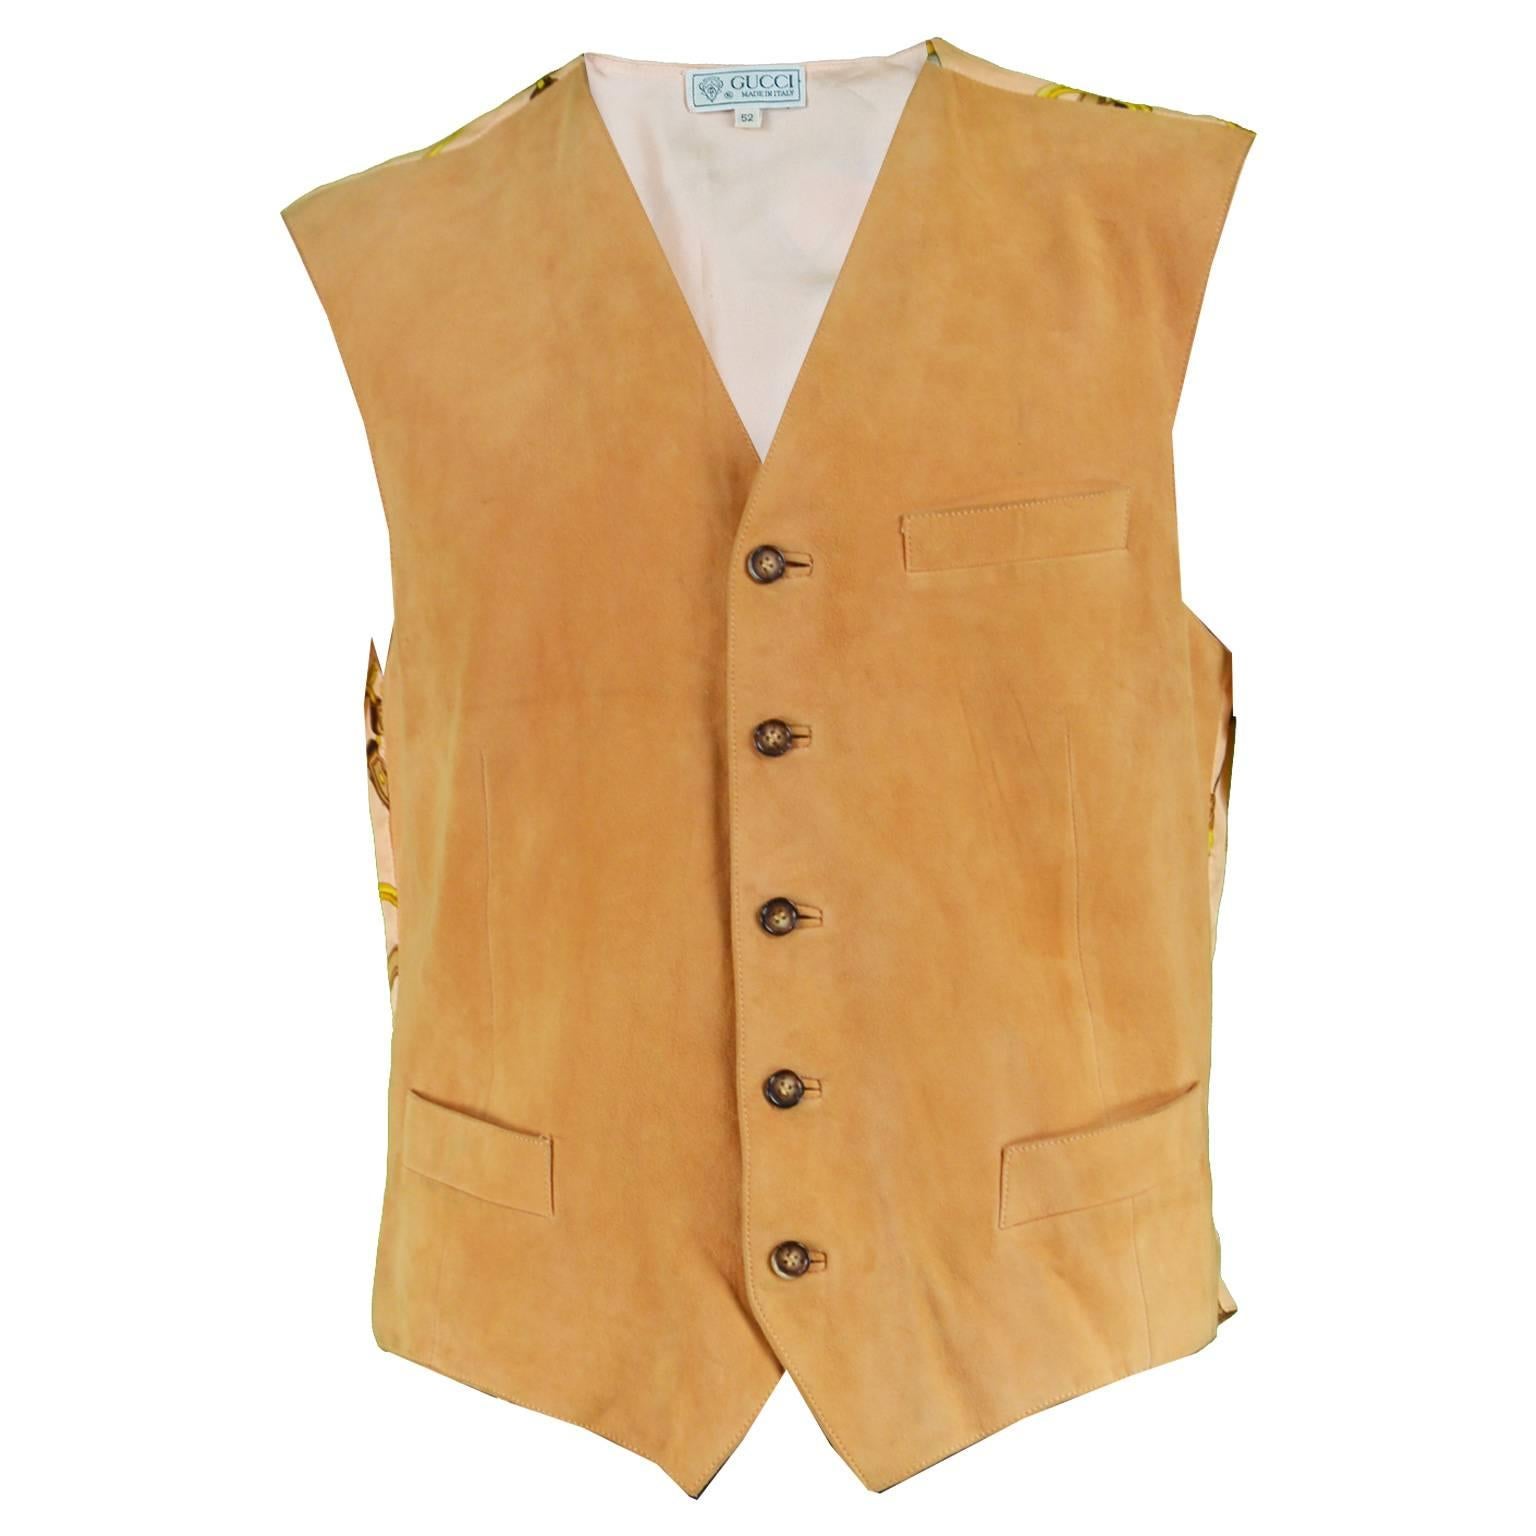 Gucci Vintage Men's Patterned Silk and Italian Suede Leather Vest, 1980s